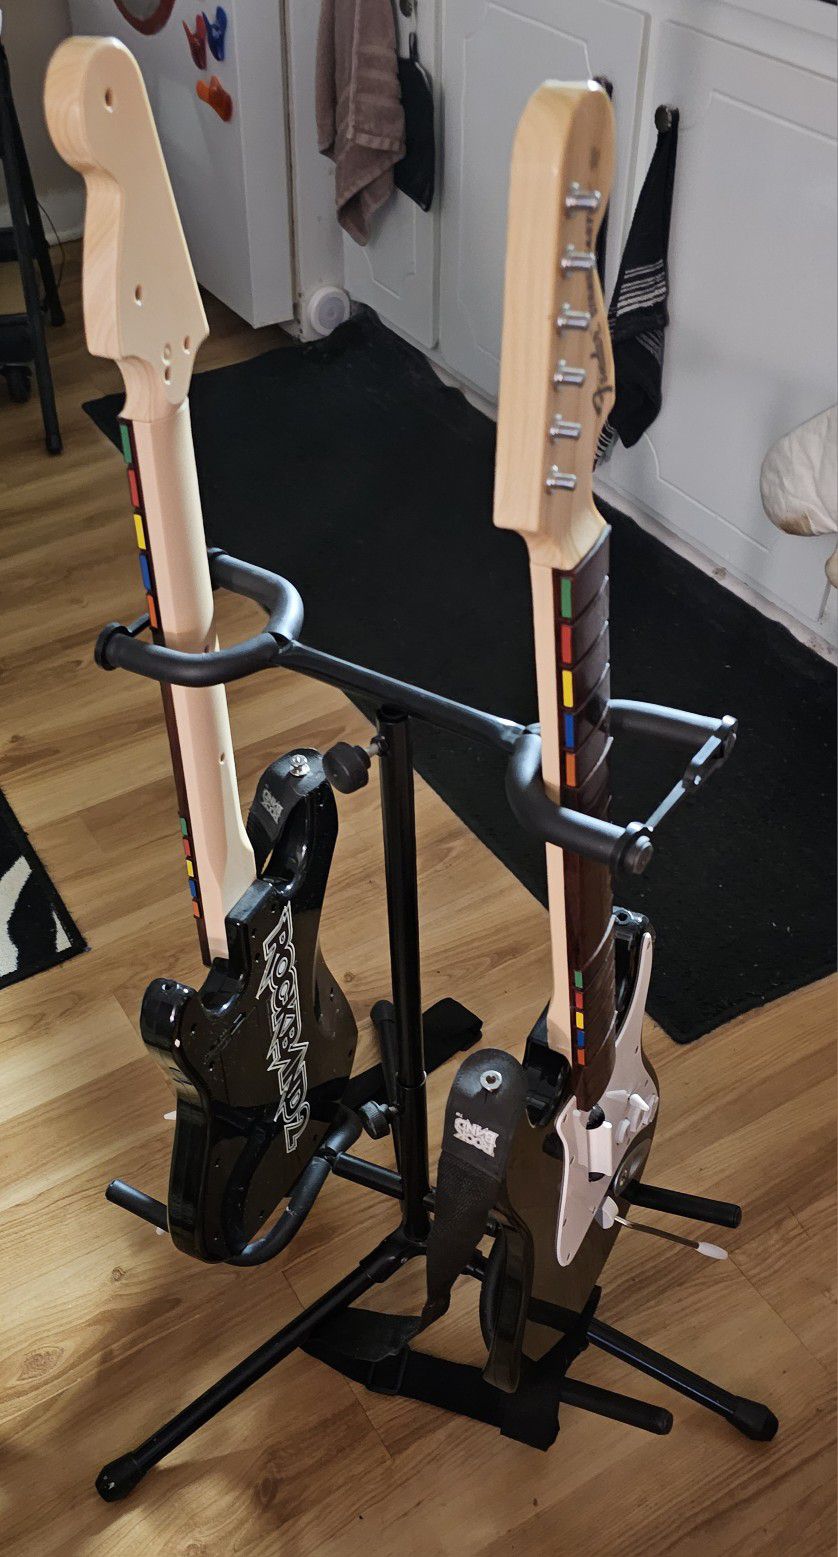 Rock Band PS3 - 2 Guitars & Microphone with Stands